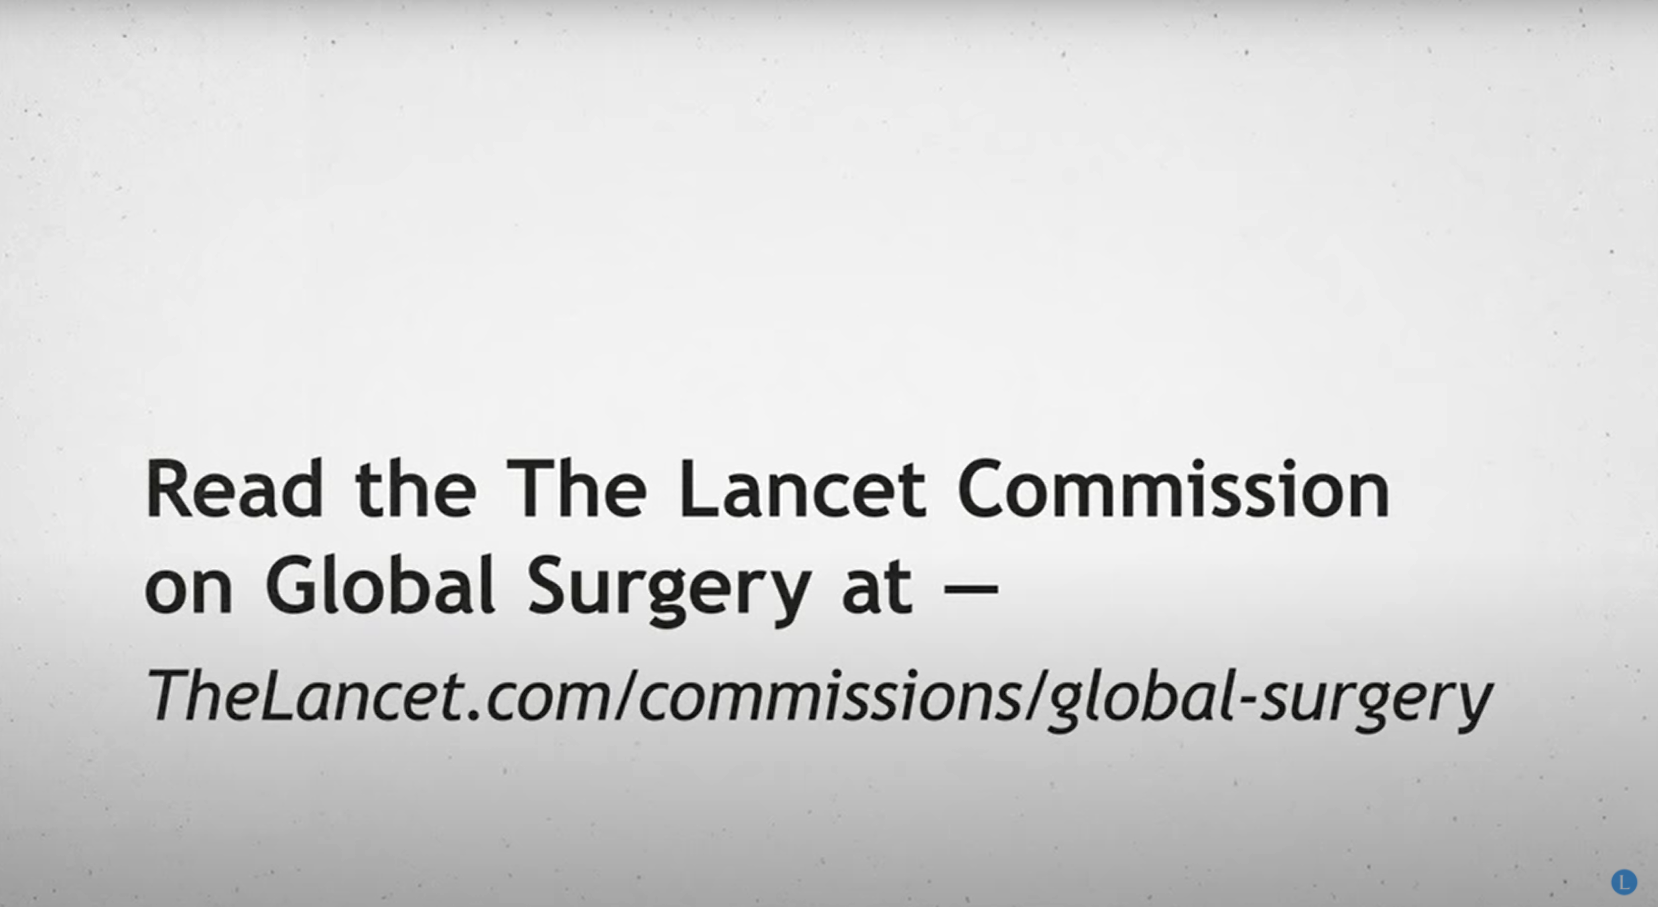 
                         Global Anesthesia                                                    - 
                          Watch the Lancet Commission Video                                                    